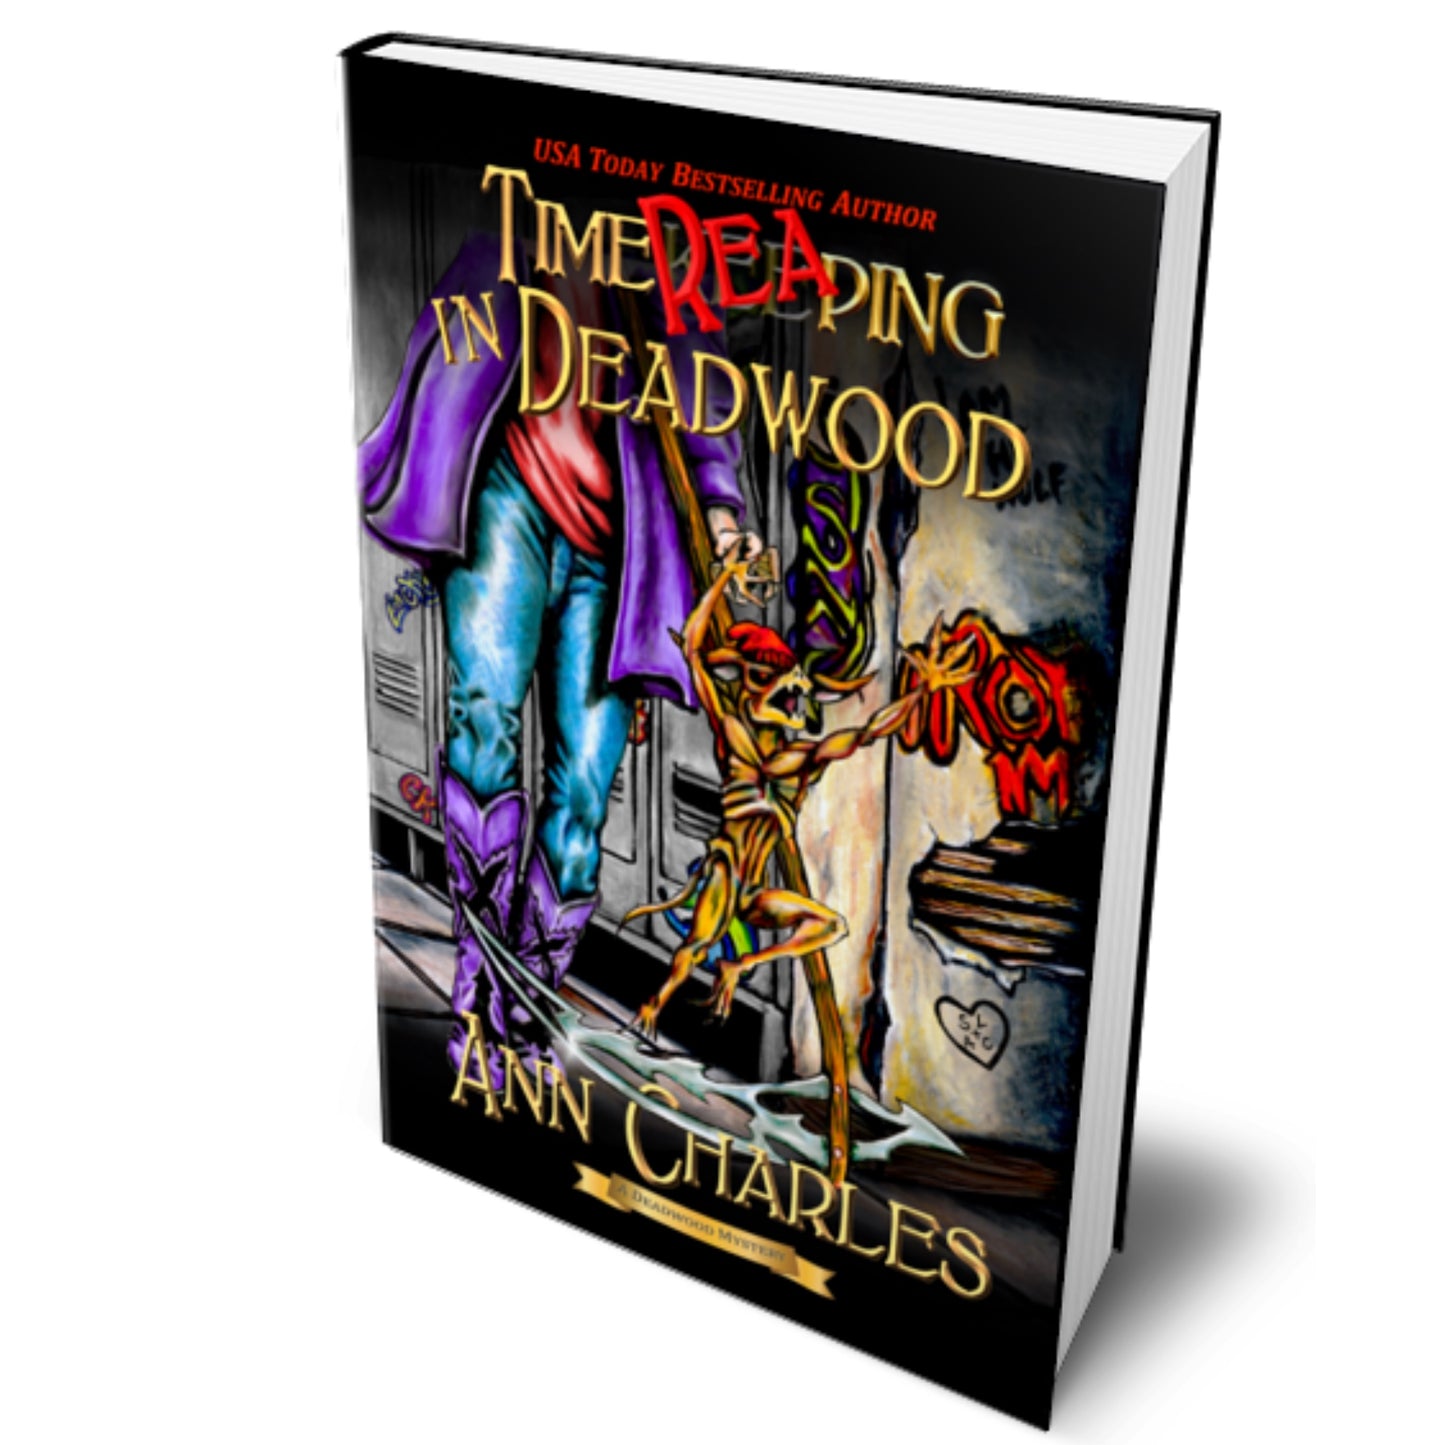 TimeReaping in Deadwood (Book 13)